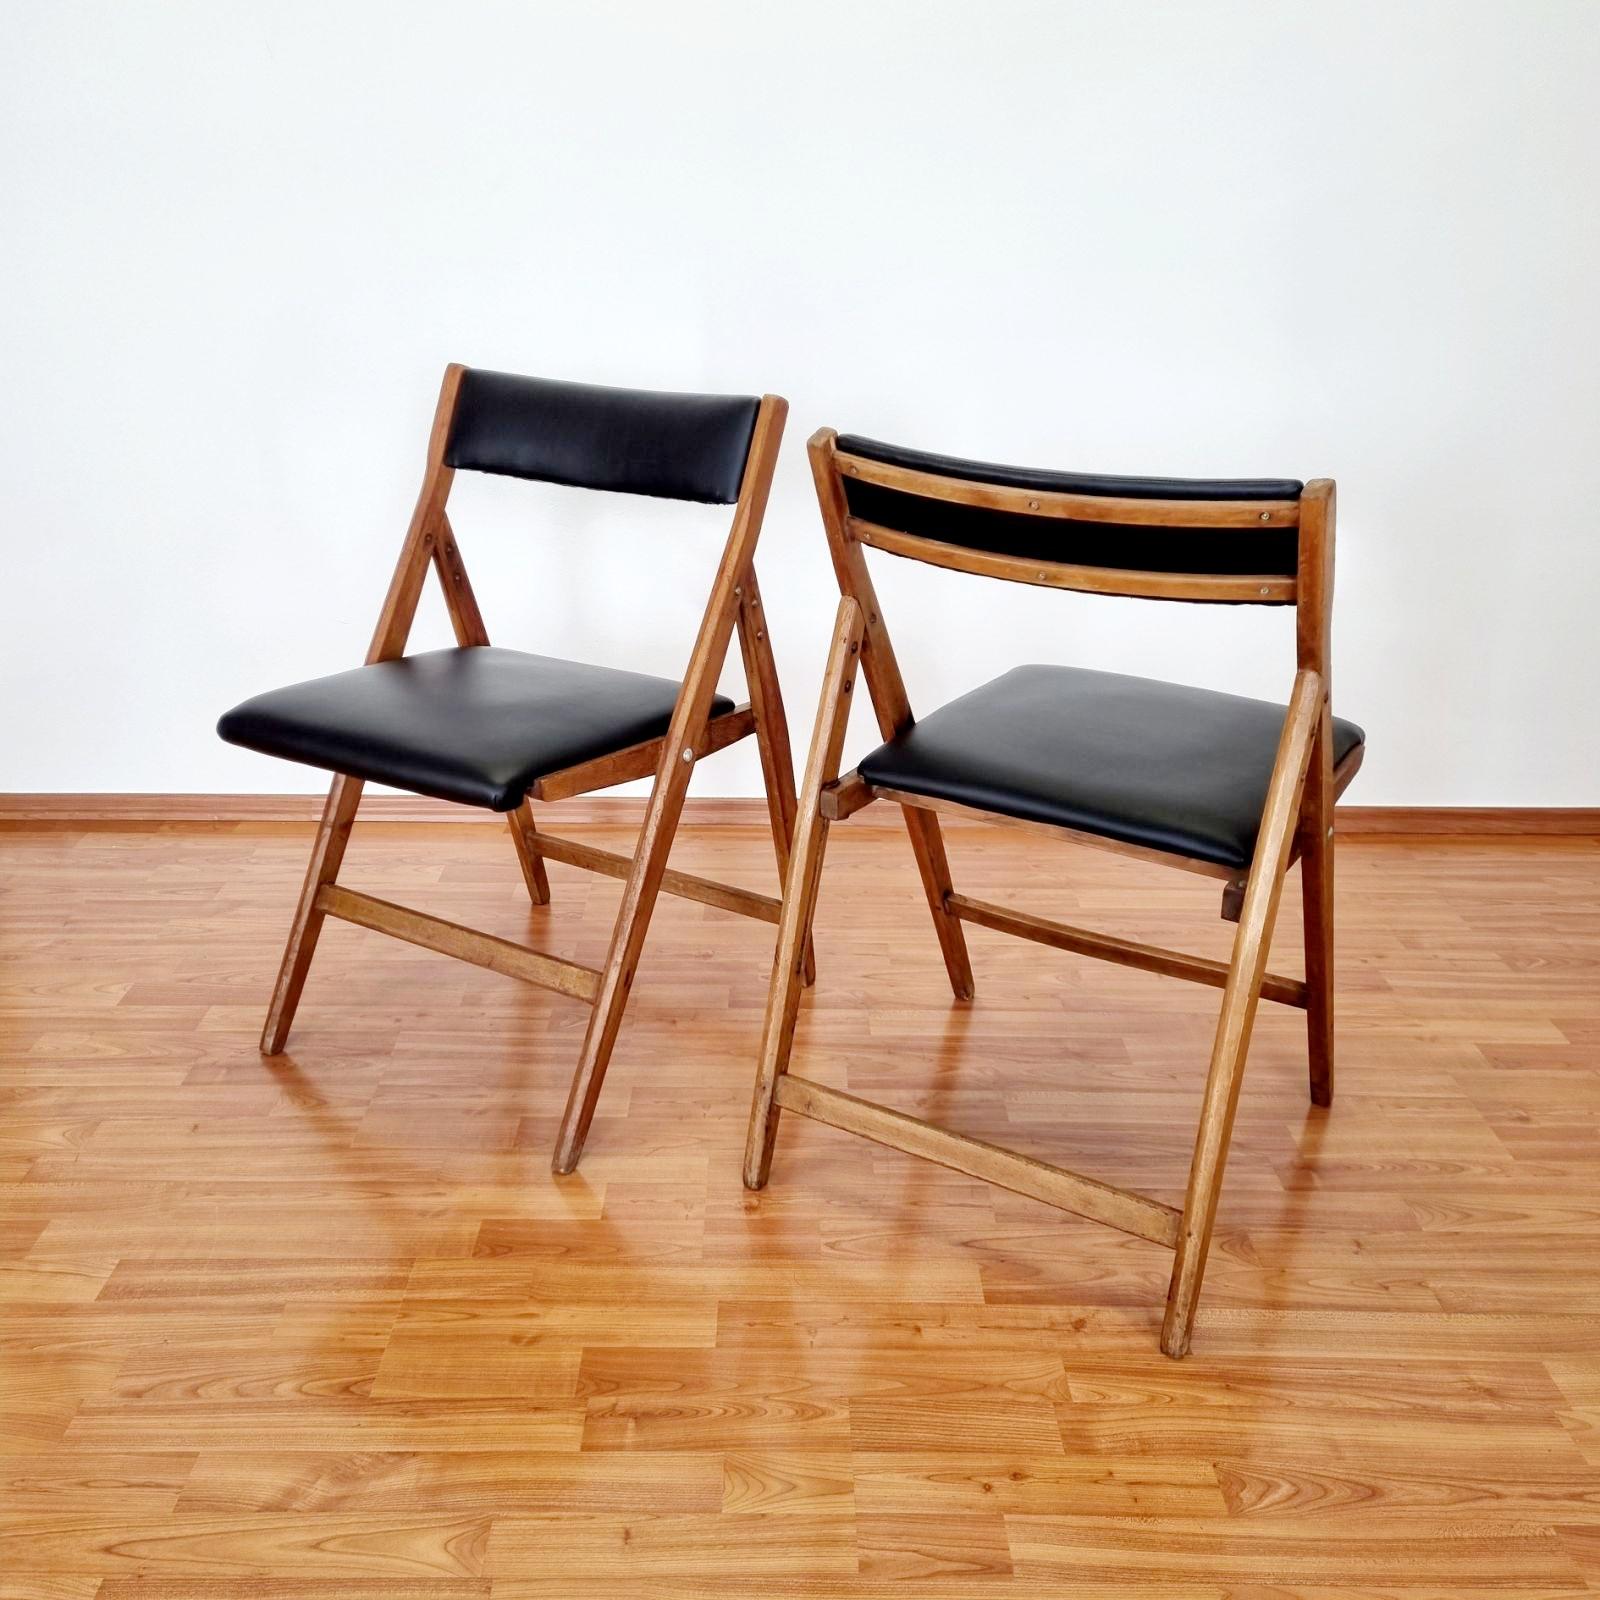 Italian Mid Century Folding Chairs Eden Designed by Gio Ponti, Italy 60s For Sale